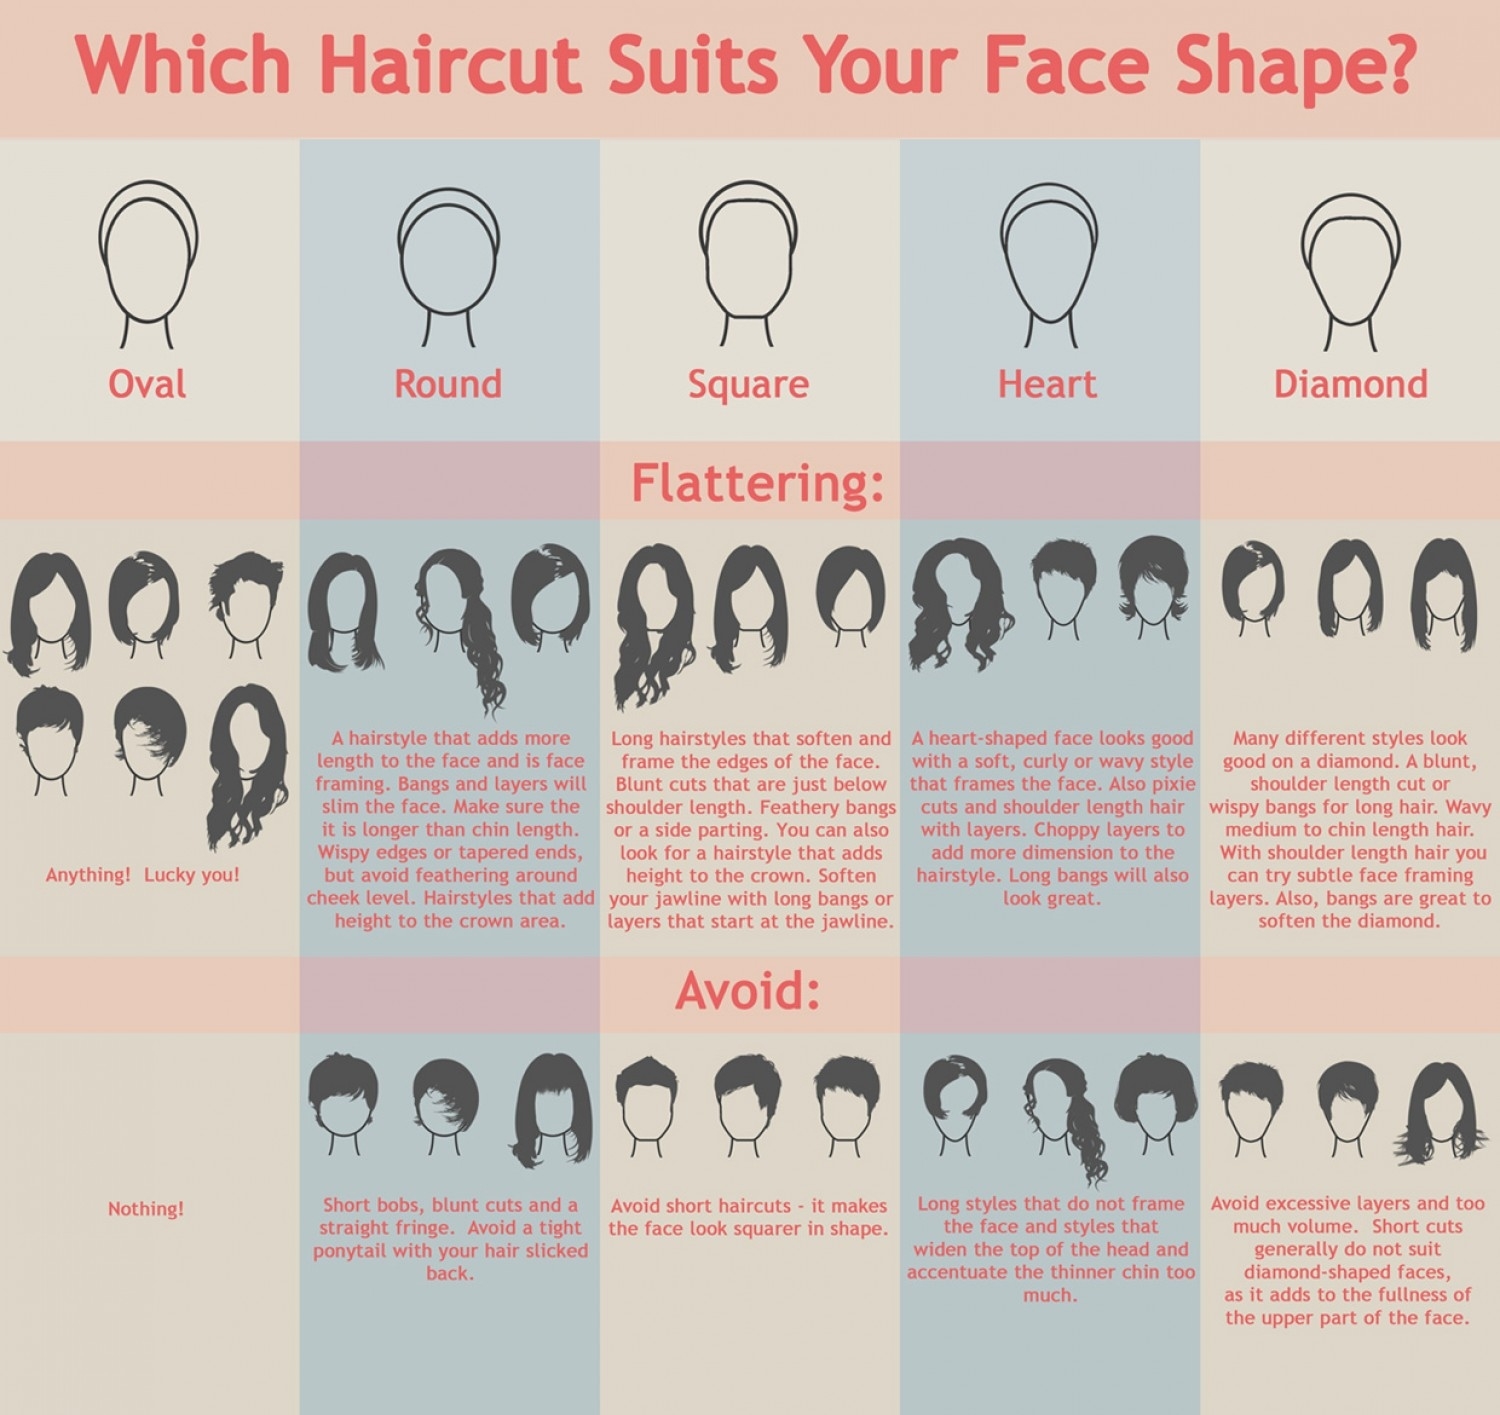 Which Haircut Suits Your Face Shape? | Visual.ly within Haircuts To Suit Your Face